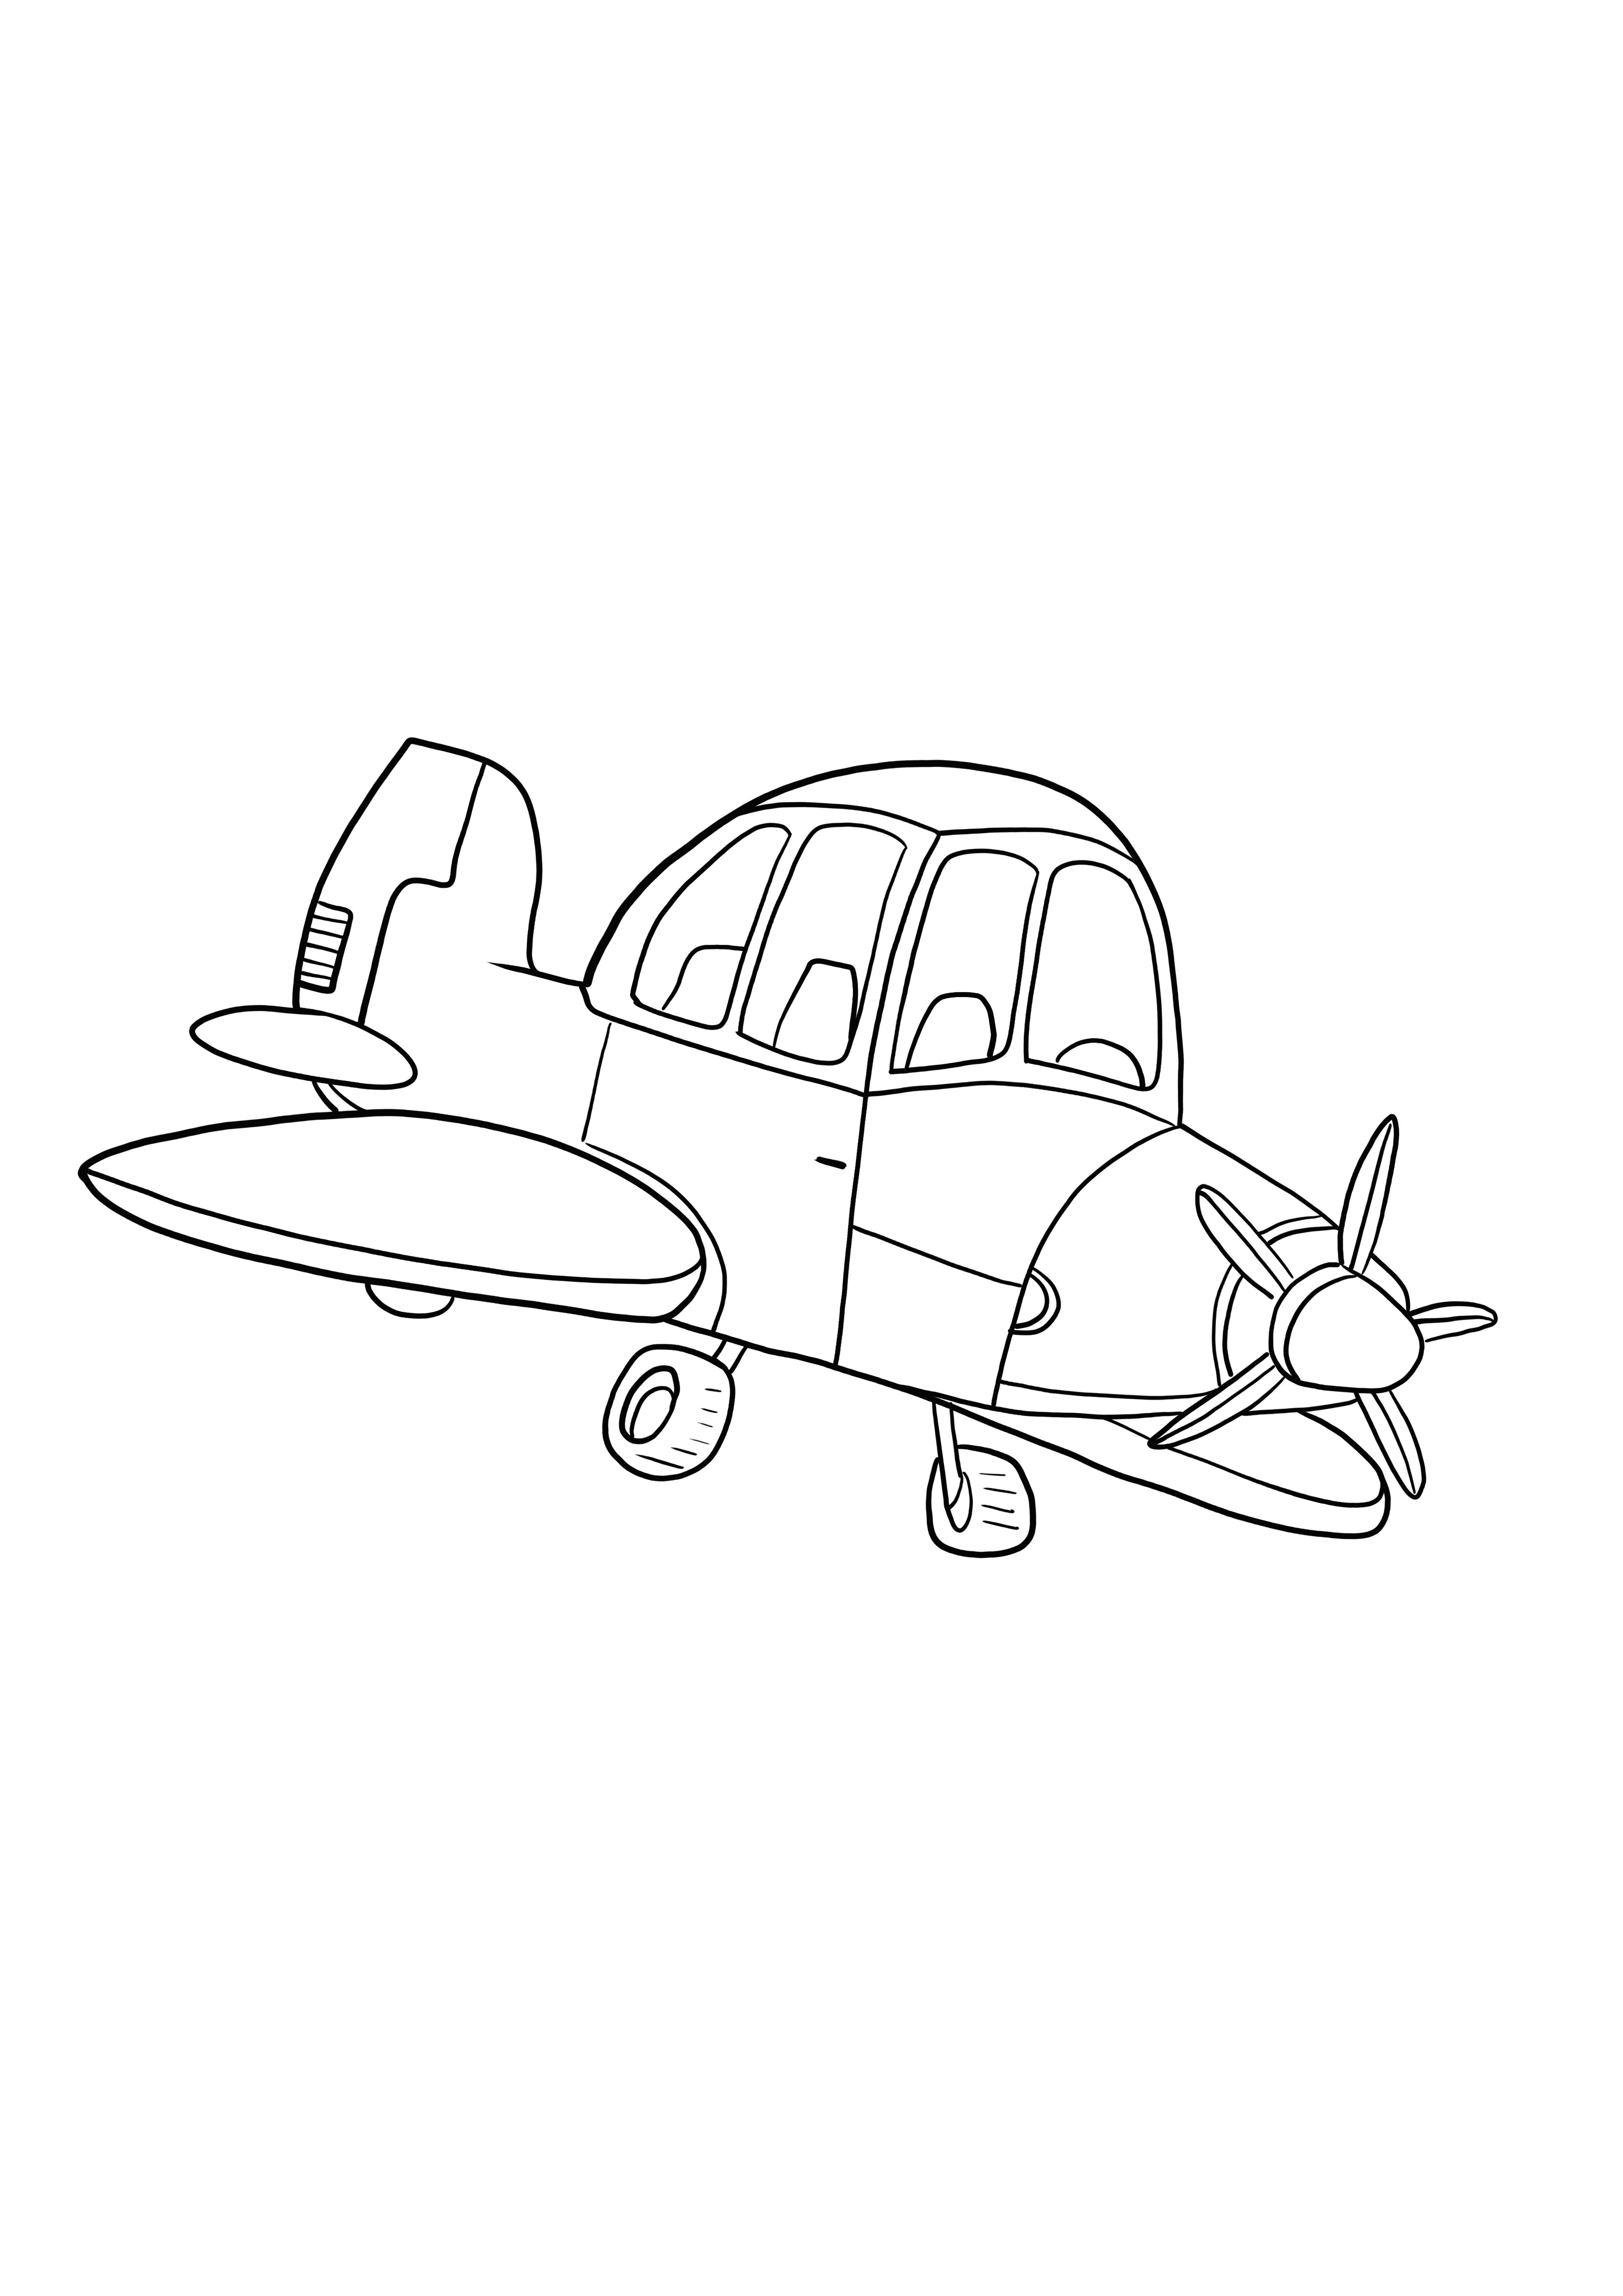 small plane free to color and print